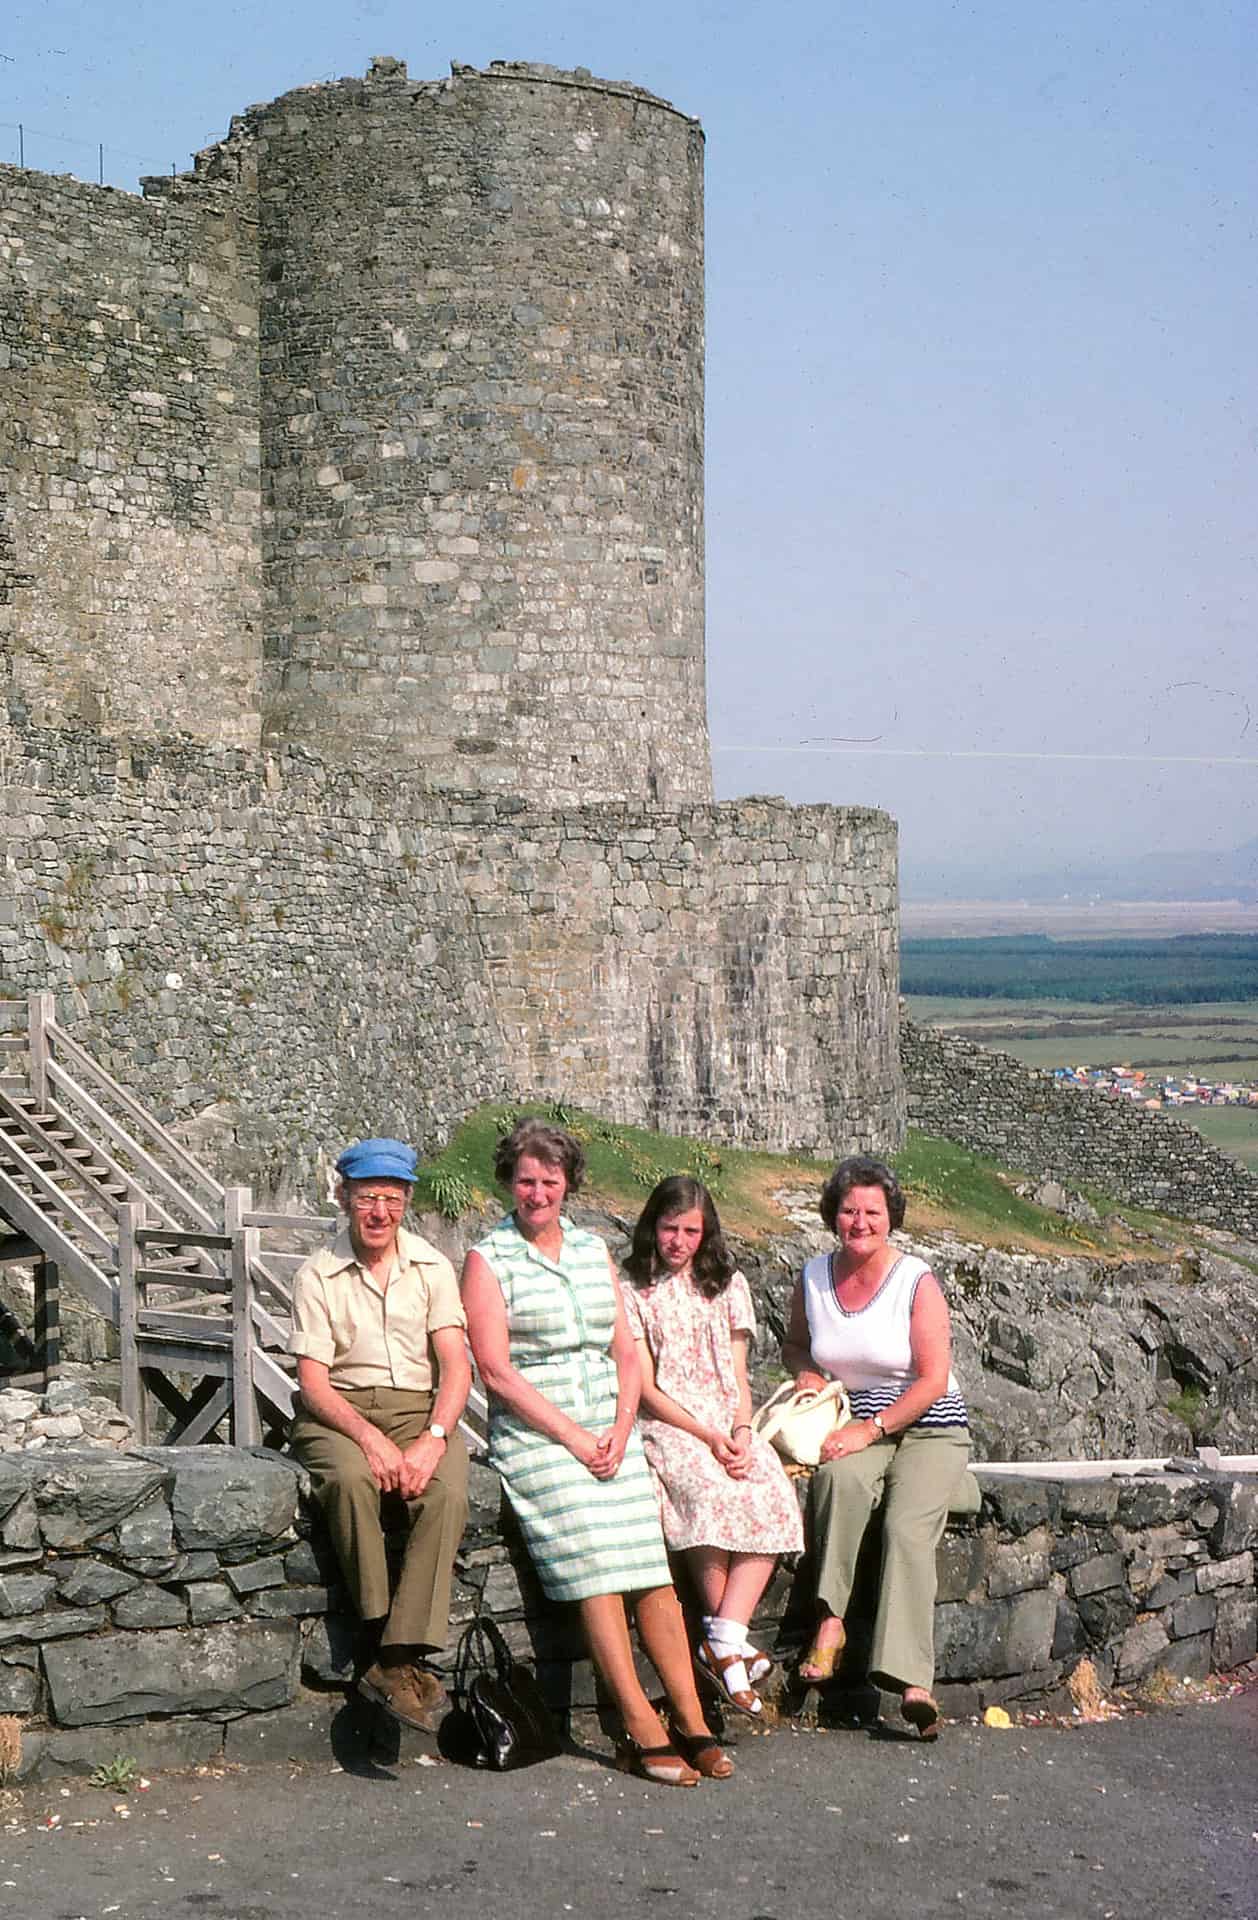 Keith’s family. His father Edward seated left, mother Una, and sister Lynn, and Una's sister Thelma seated far right. Taken at Harlech Castle, Wales, 1978